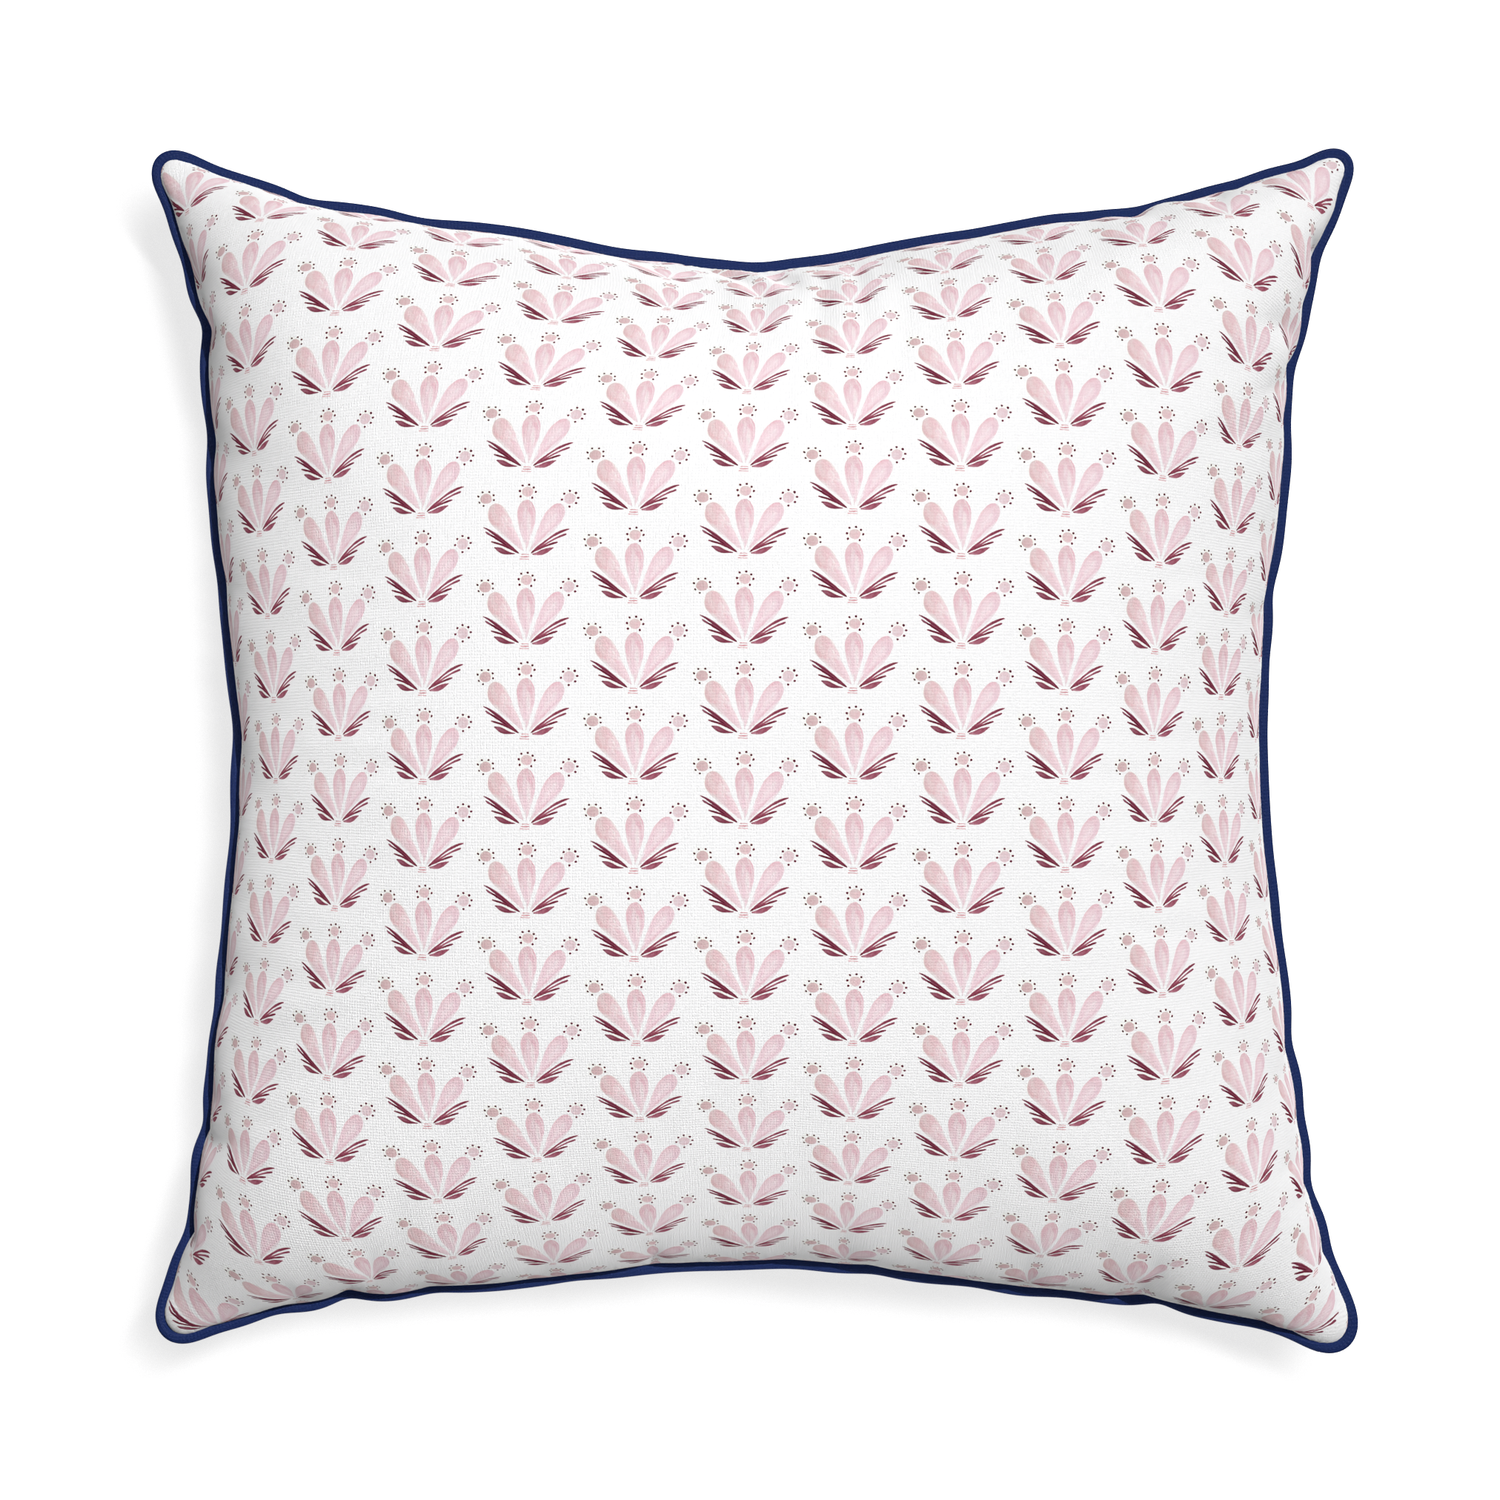 Euro-sham serena pink custom pillow with midnight piping on white background